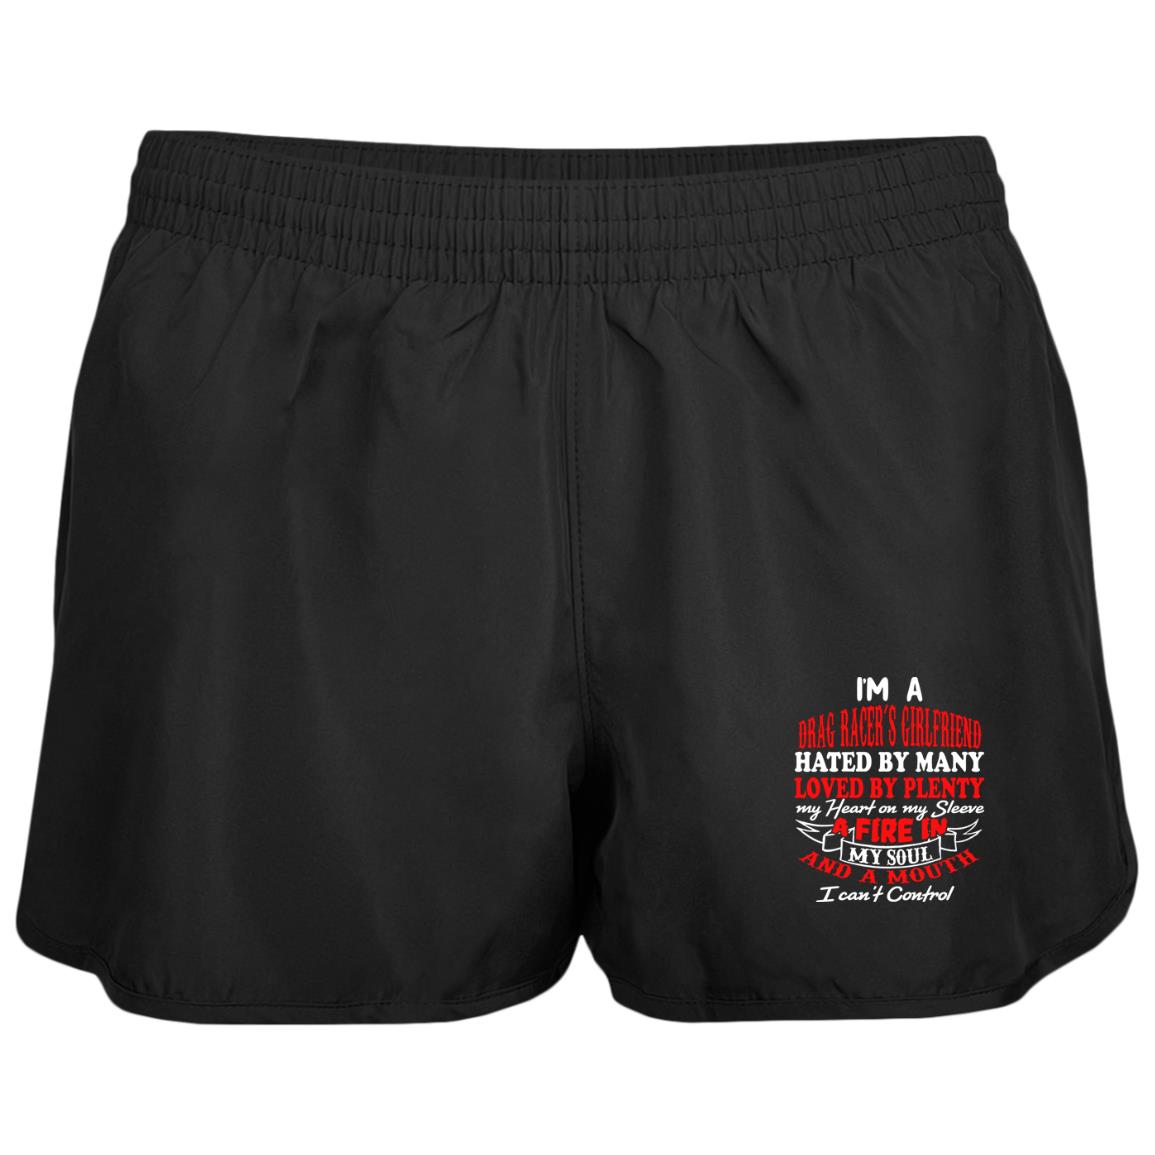 I'm A Drag Racer's Girlfriend Hated By Many Loved By Plenty Ladies' Wayfarer Running Shorts